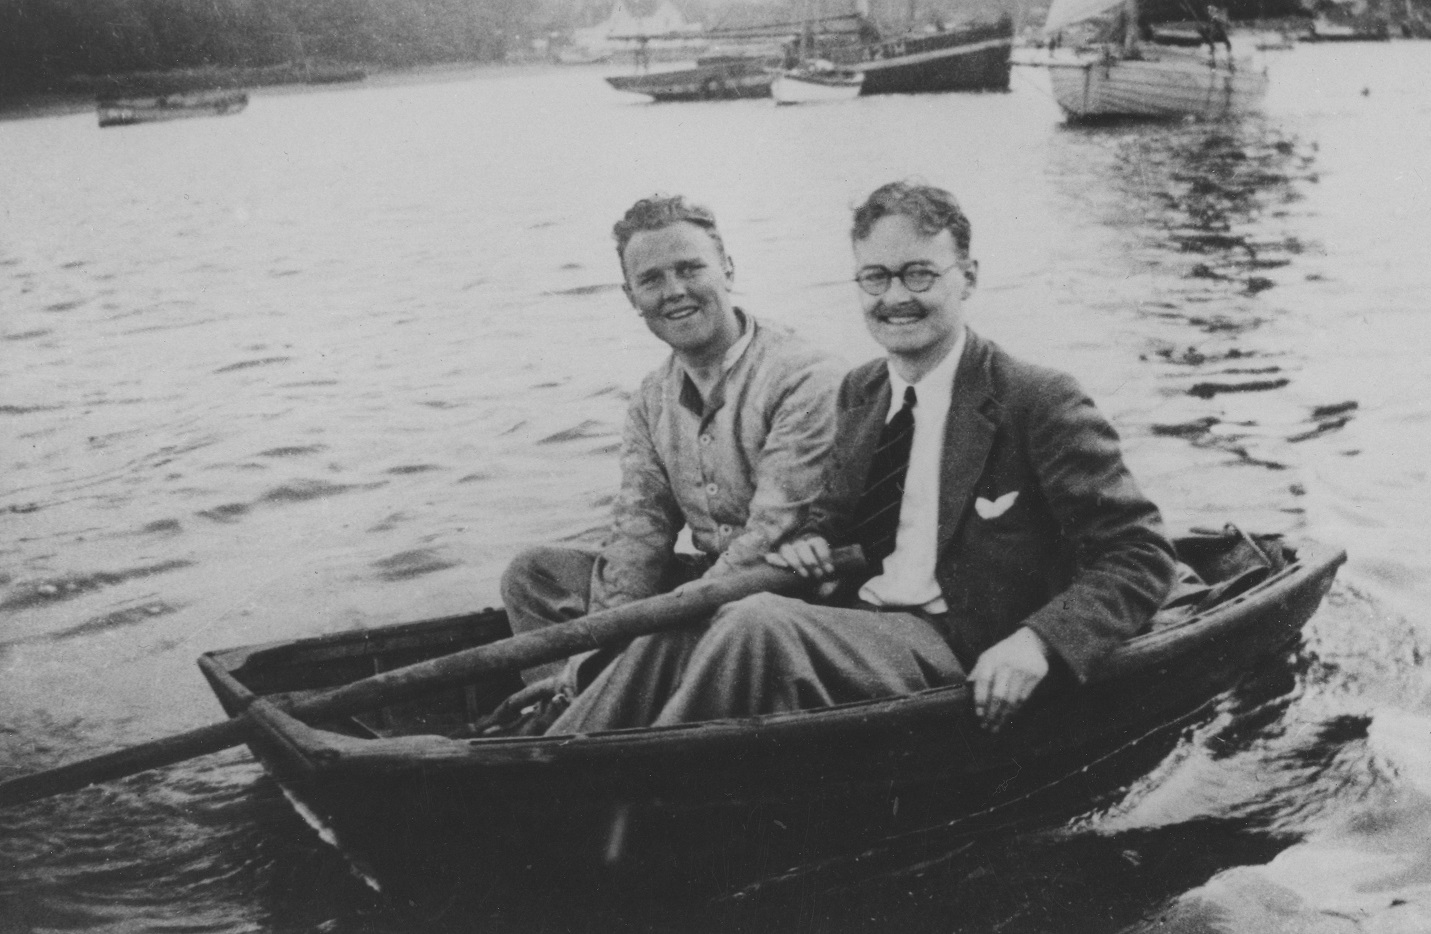 Black and white image shows two men sitting in a small rowboat on the river.